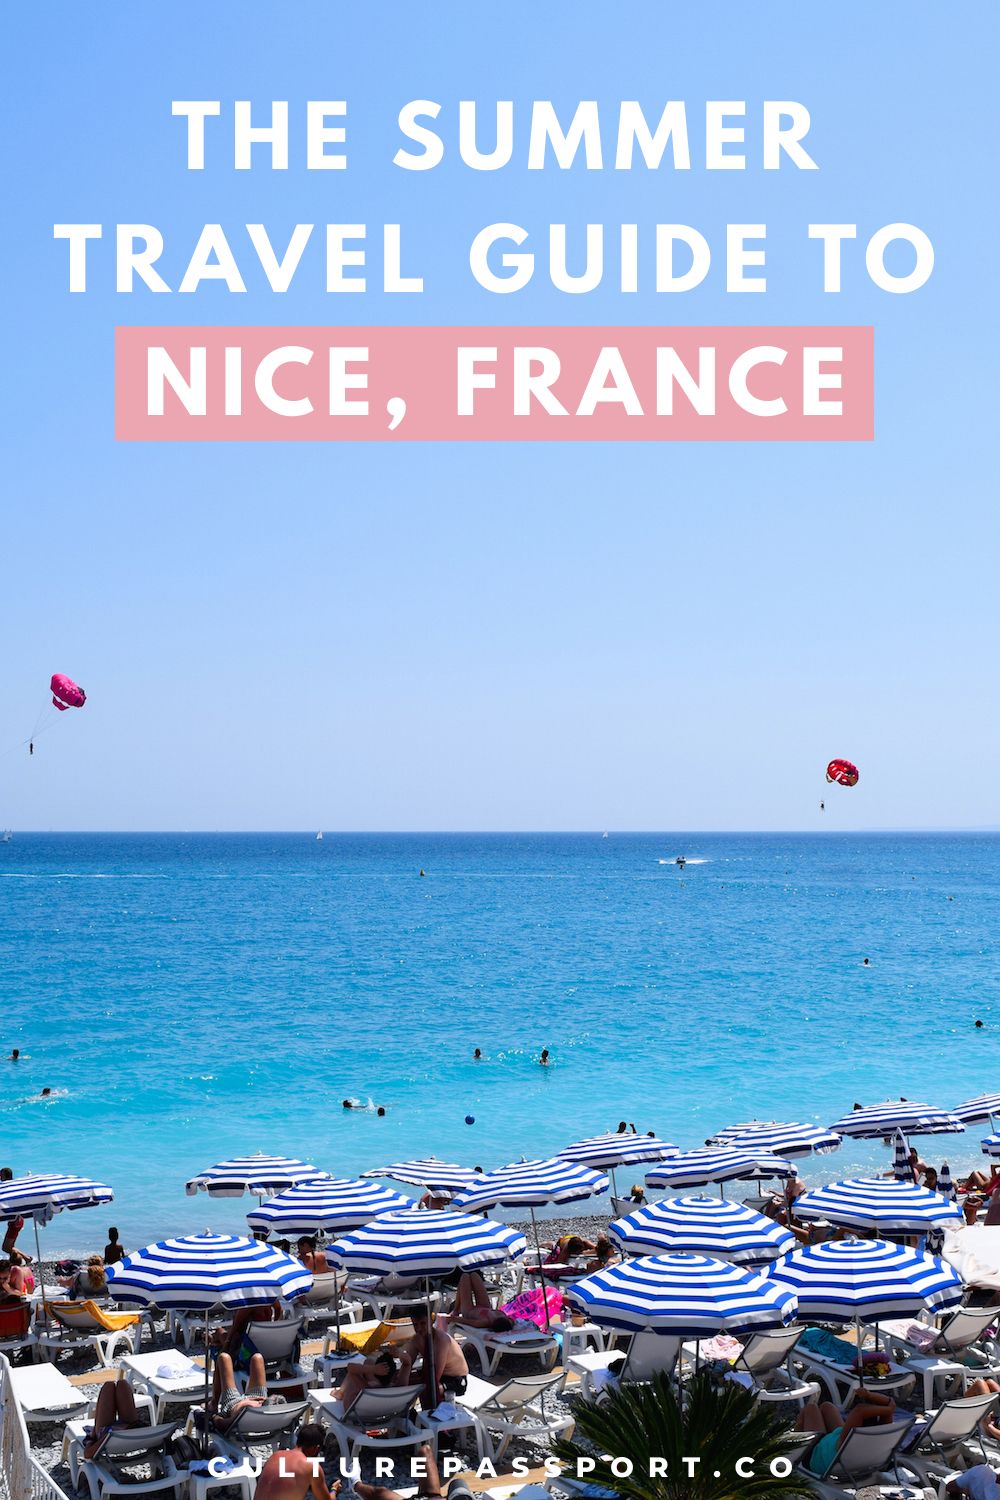 The Summer Travel Guide To Nice, France